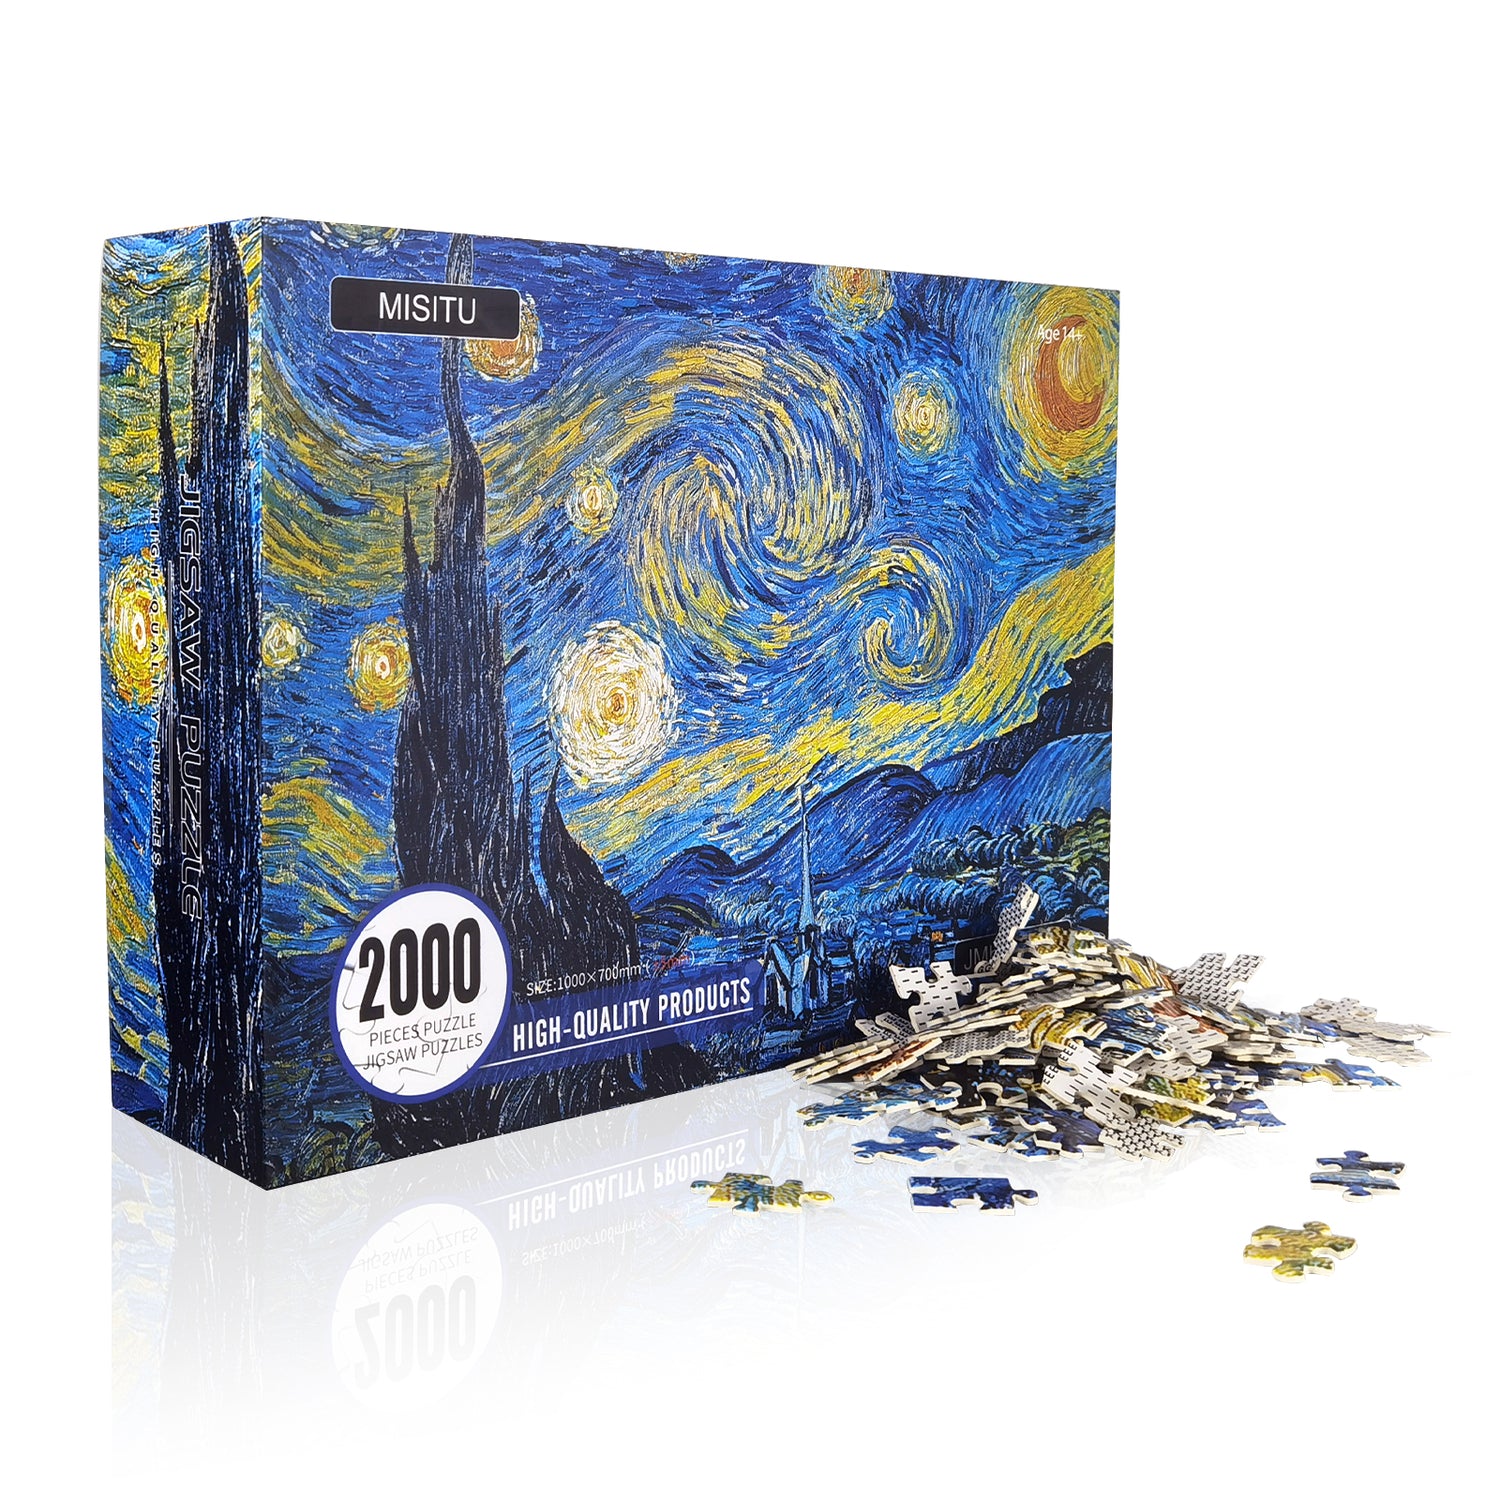 2000 Pieces Jigsaw Puzzles